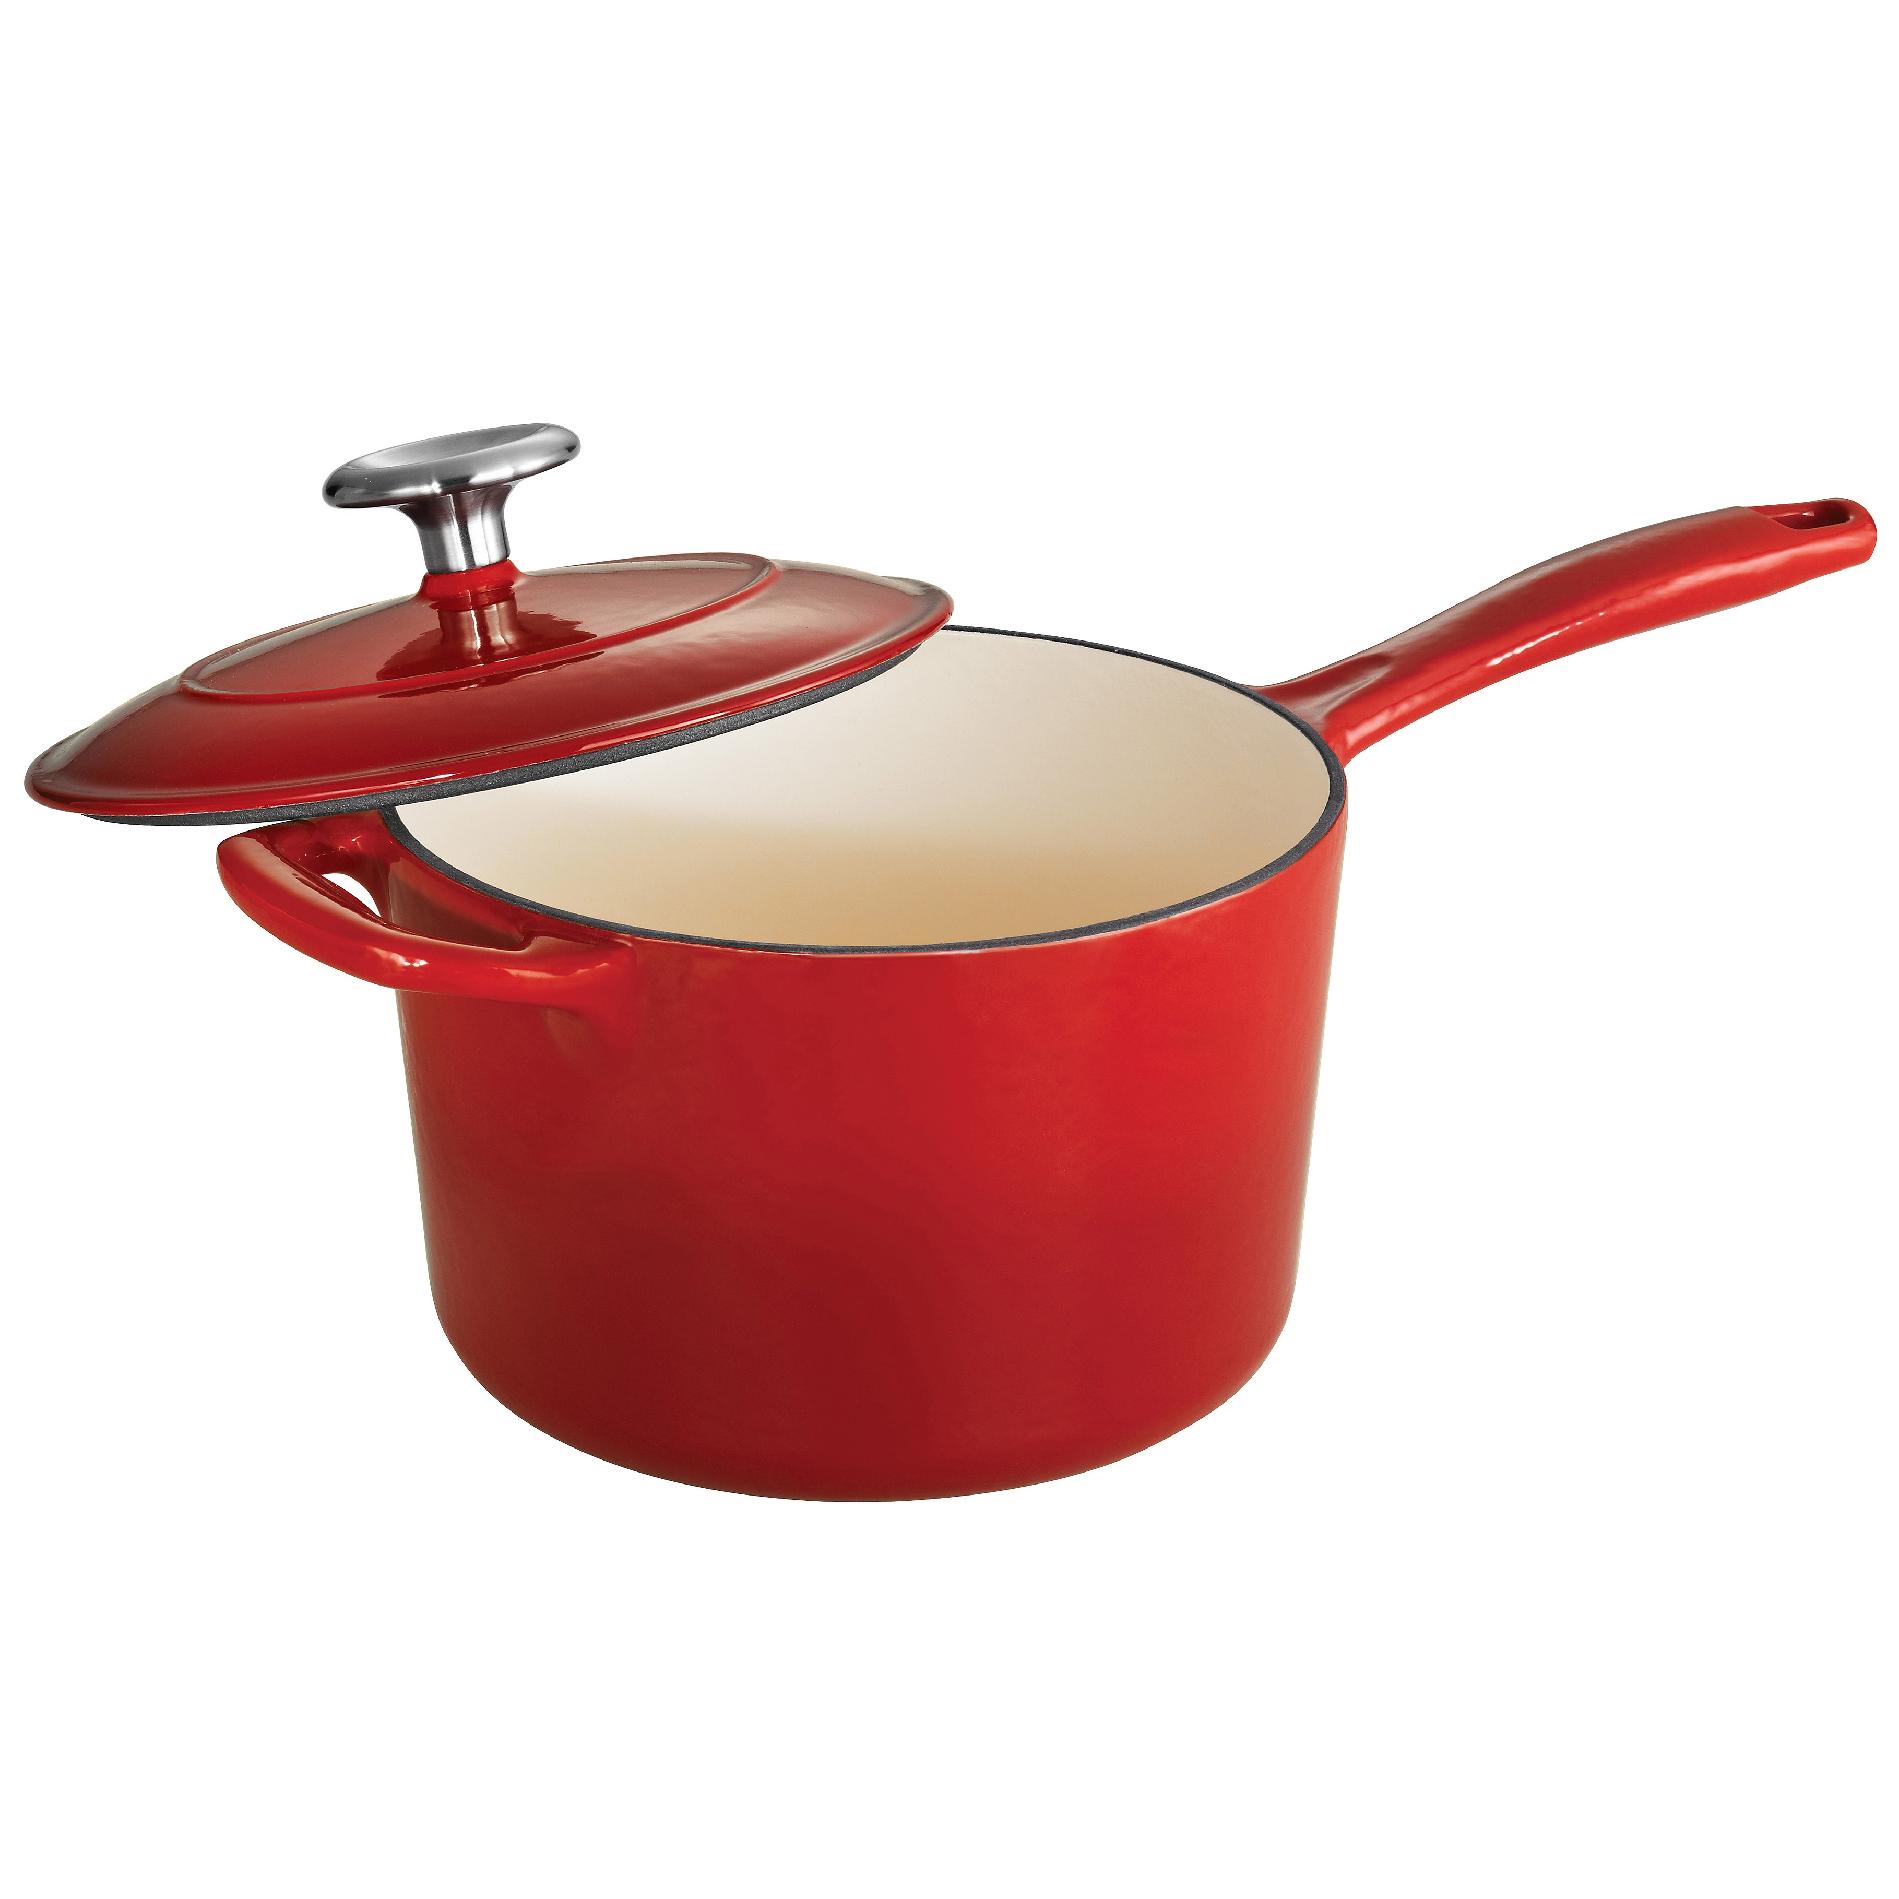 0016017074927 - GOURMET ENAMELED CAST IRON 2.5 QT COVERED SAUCE PAN